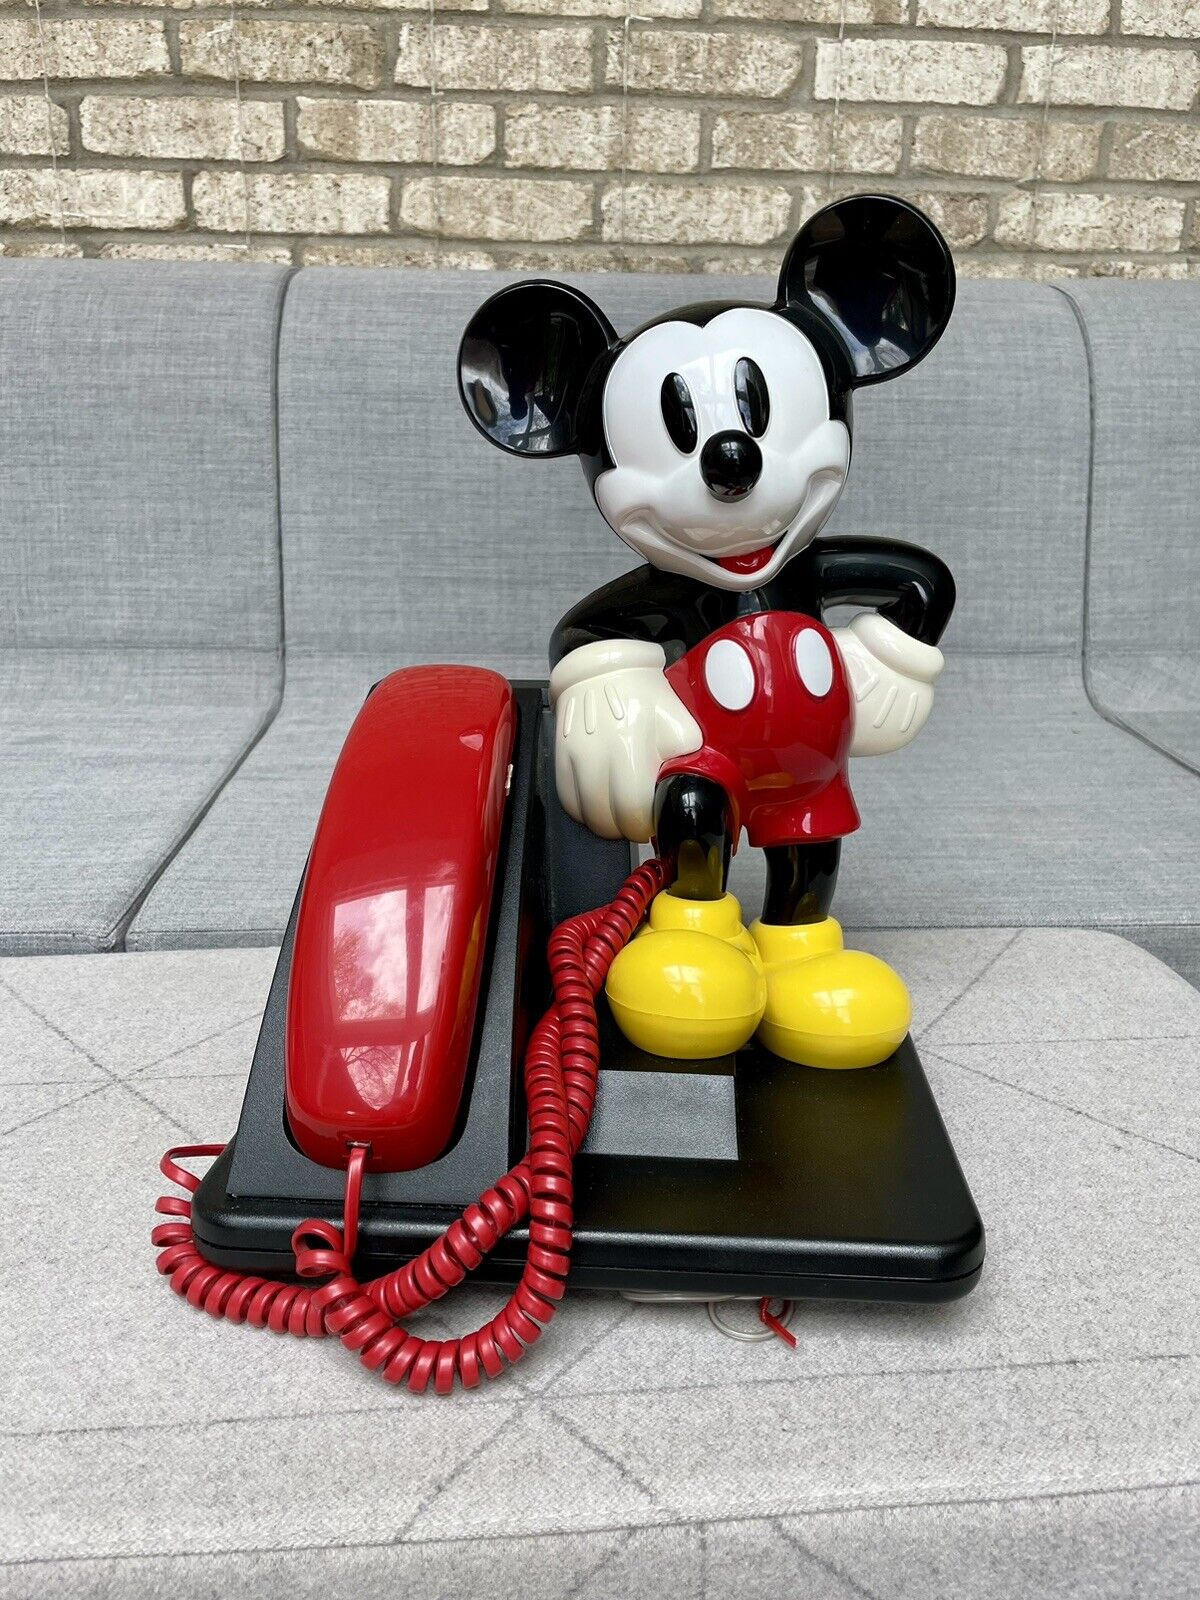 Vintage 1990's Mickey Mouse Corded Land Line Telephone AT&T Disney 90s Retro